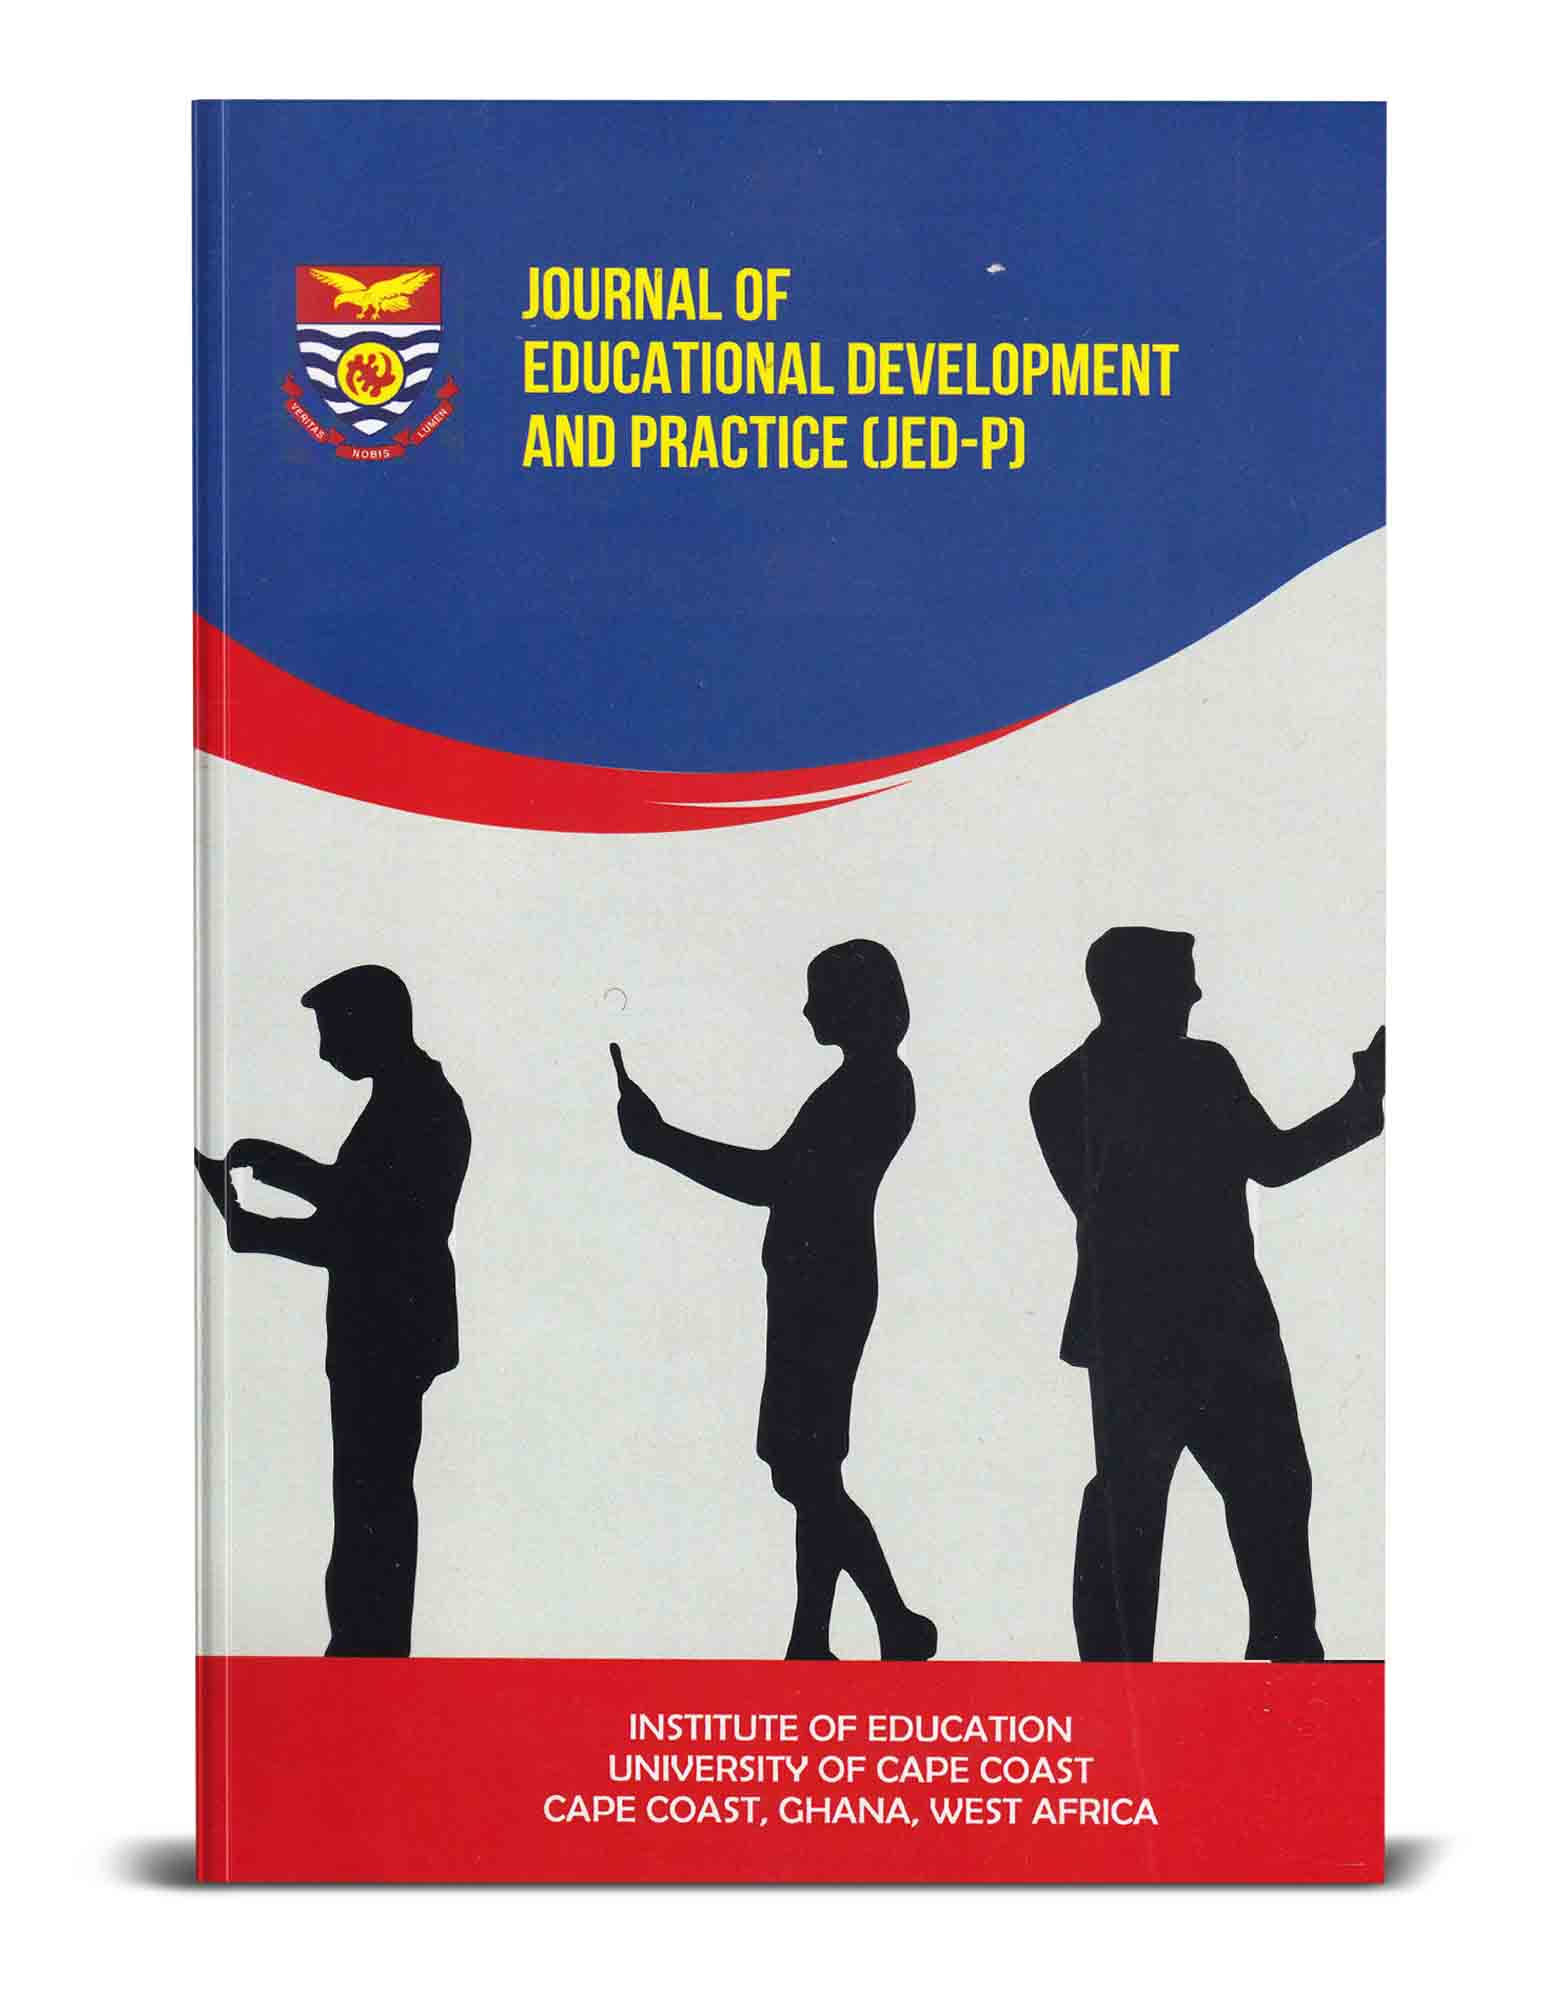 					View Vol. 5 No. 1 (2021): Journal of Educational Development and Practice (JED-P)
				